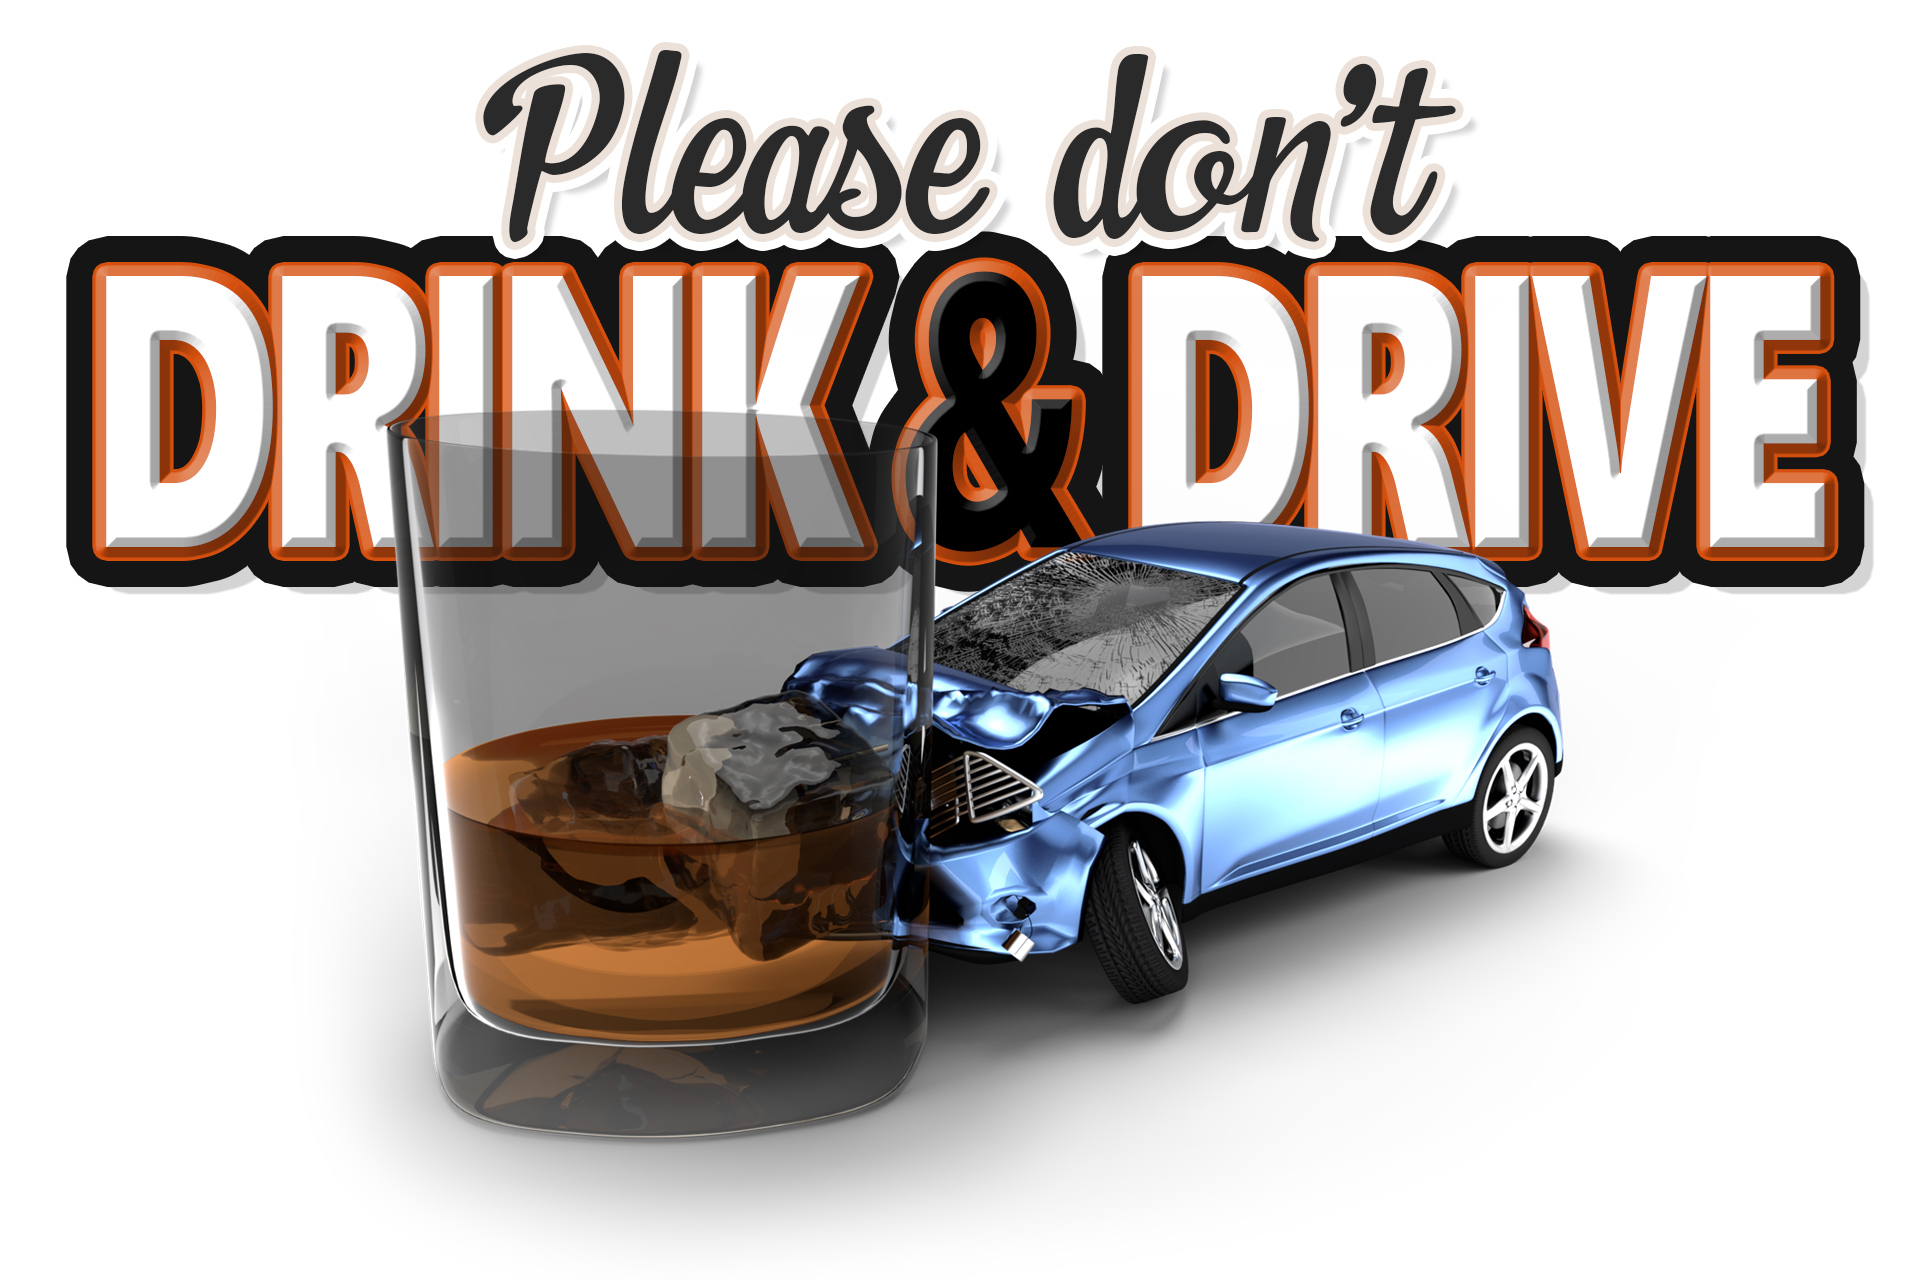 Please don't drink and drive free image download